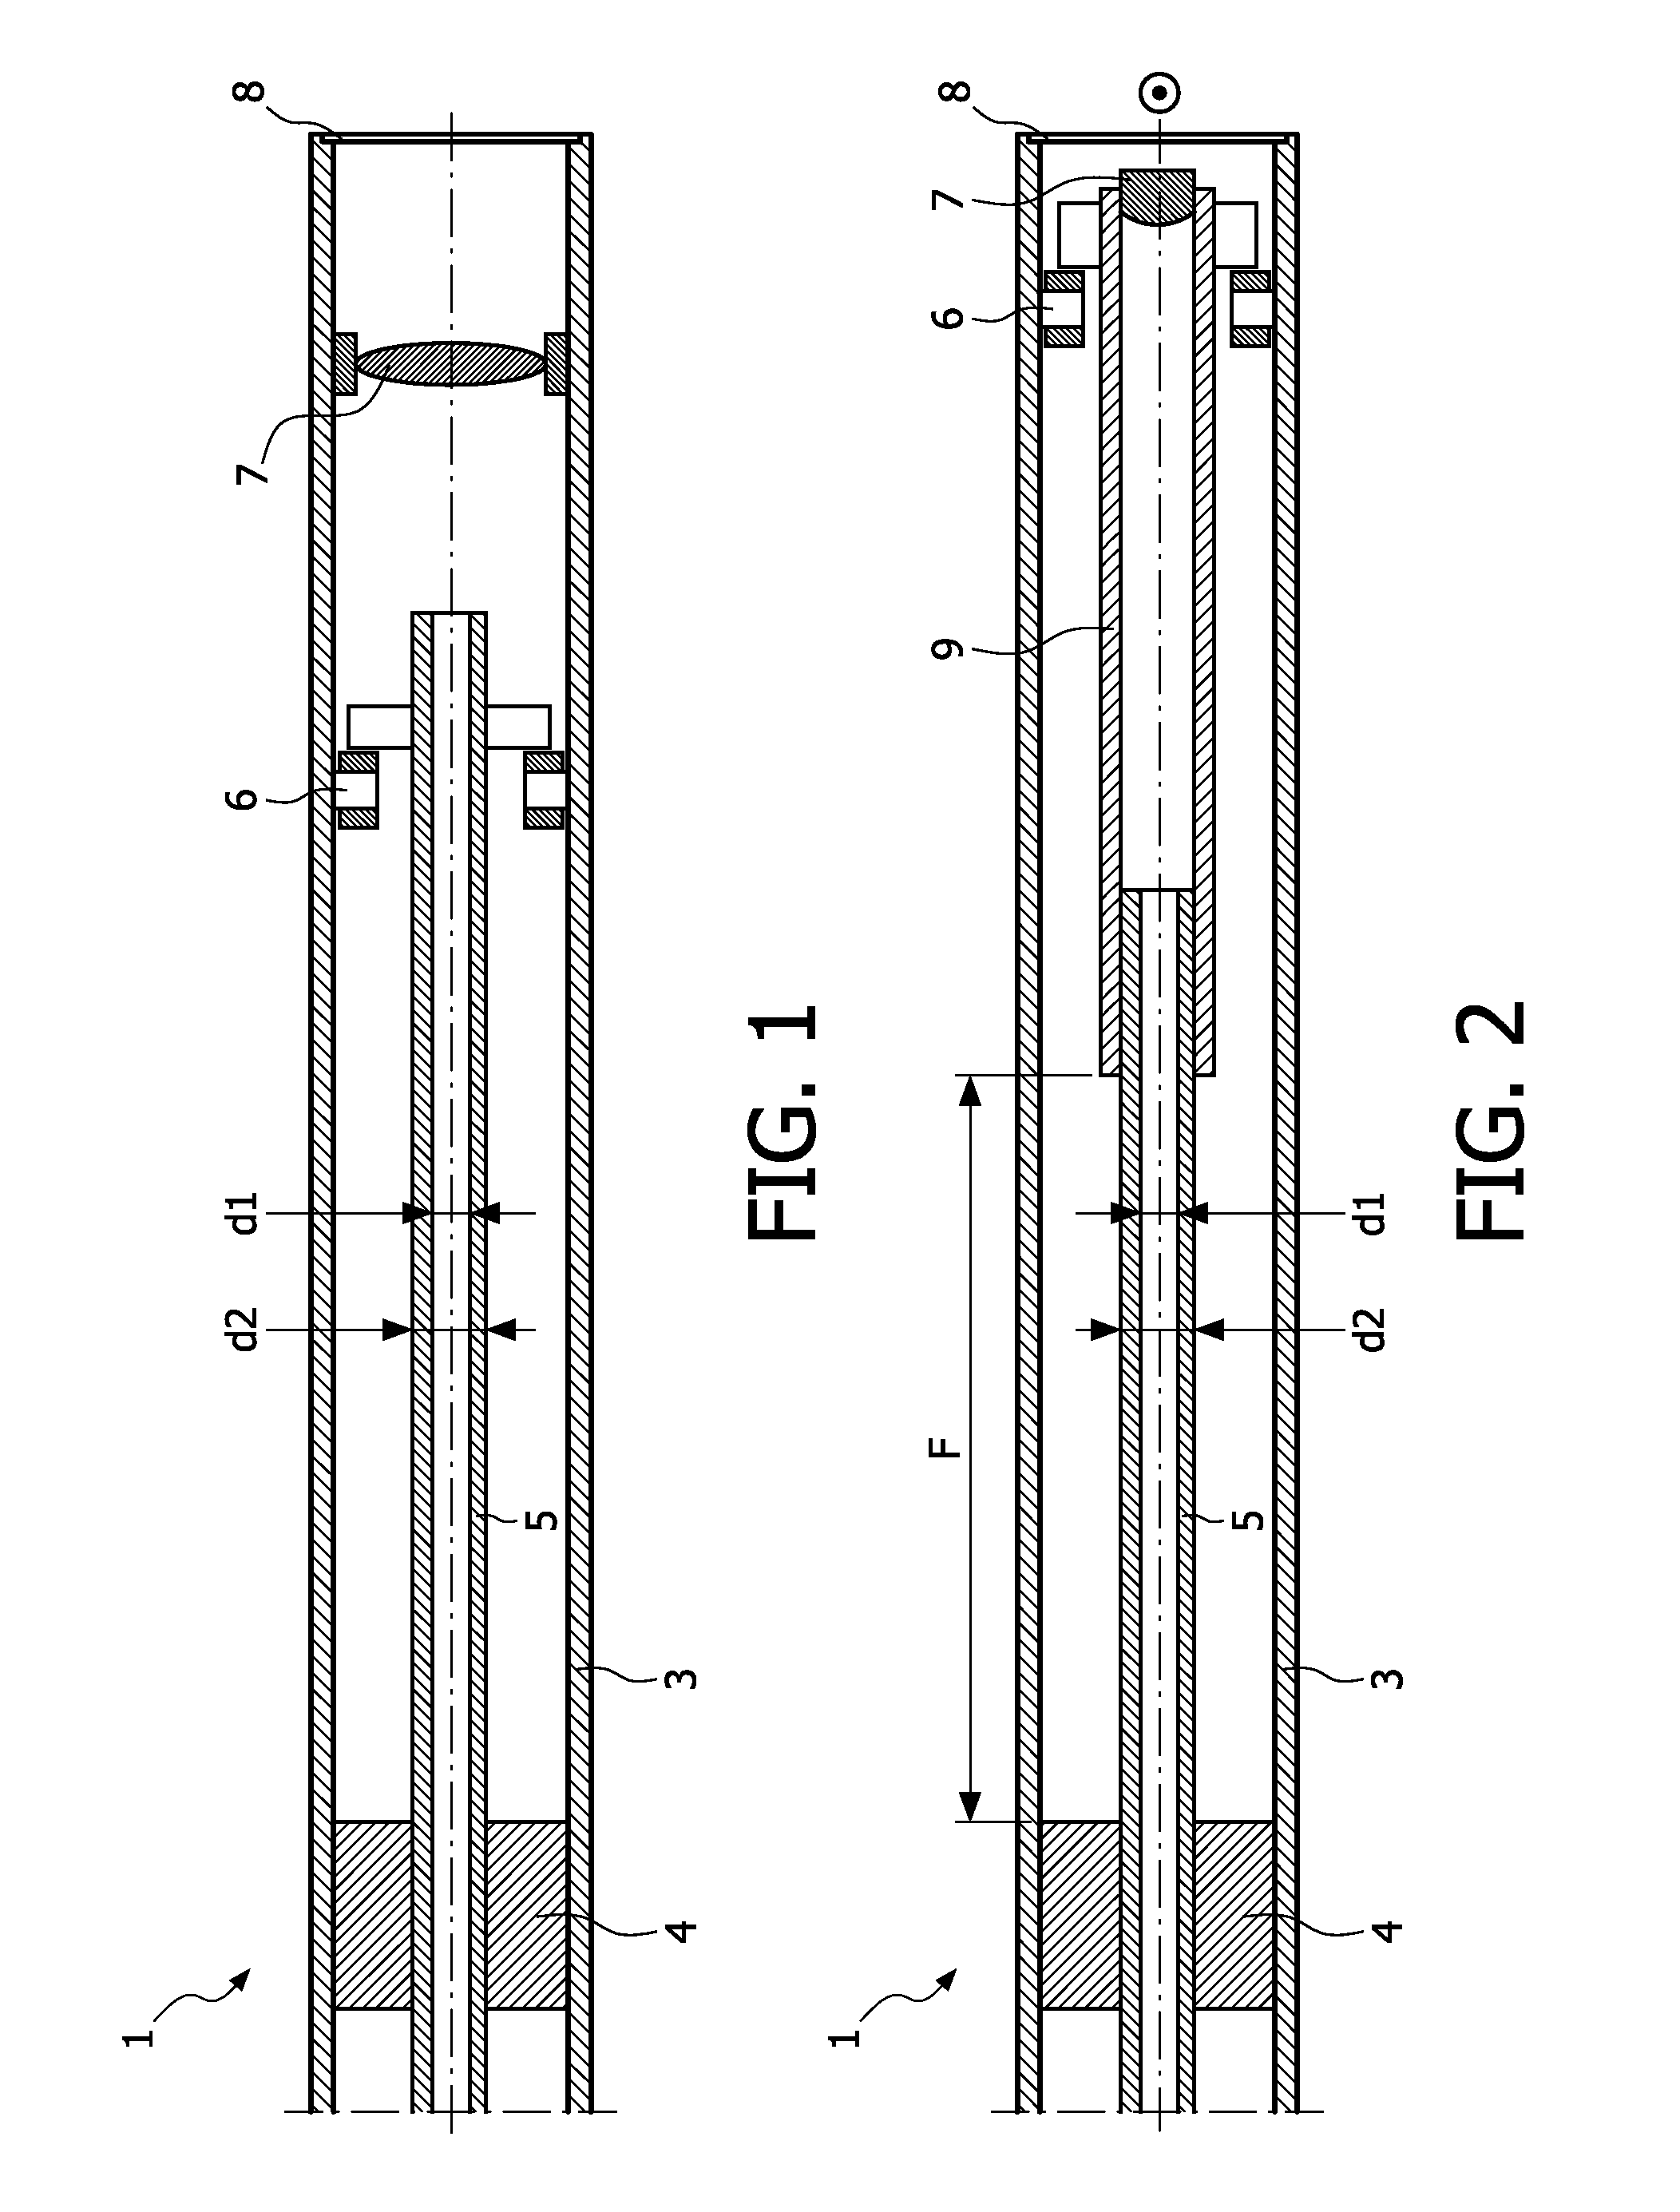 Optical scanning probe assembly